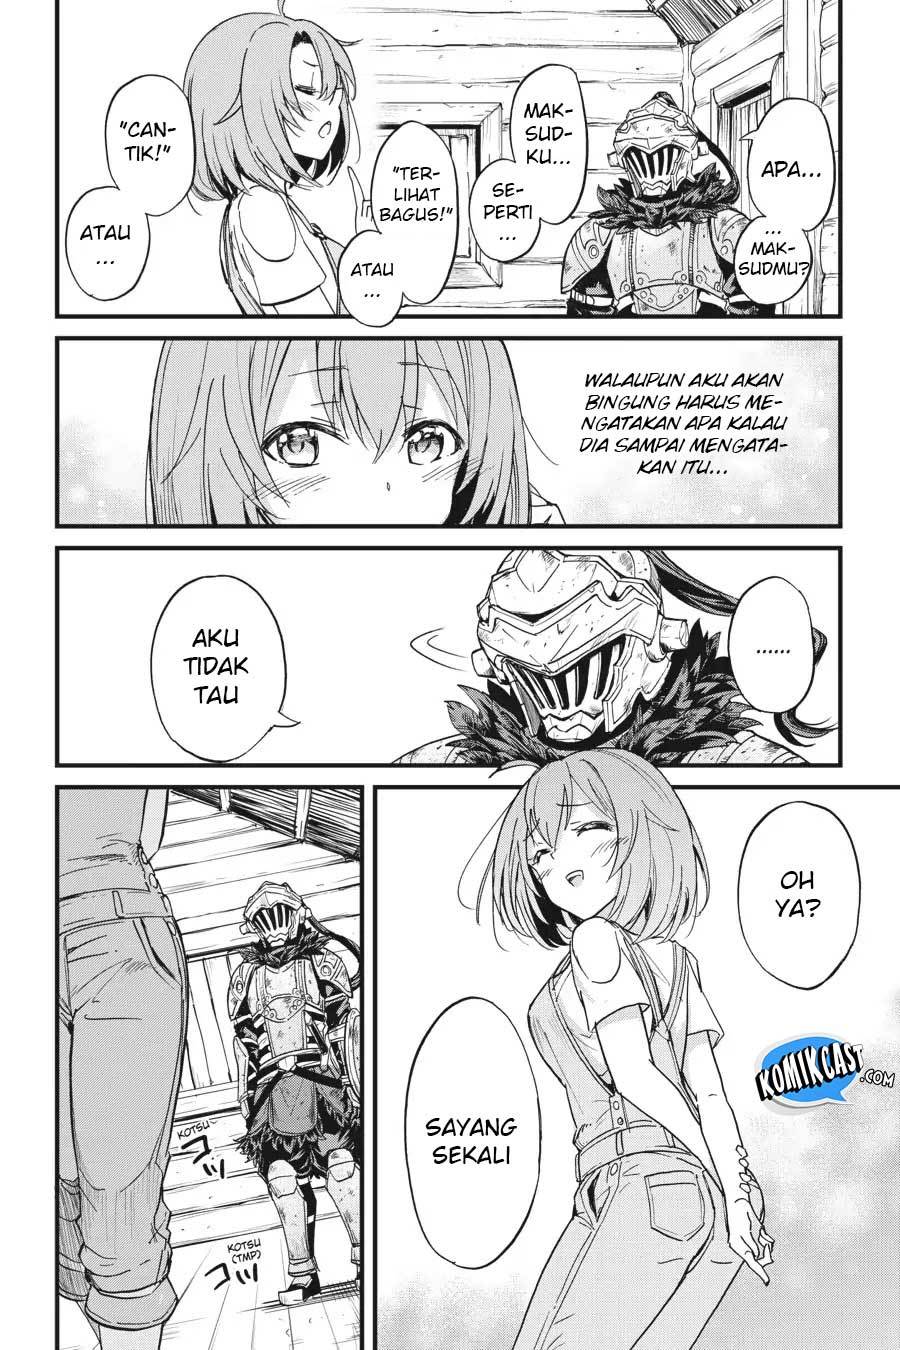 Goblin Slayer: Side Story Year One Chapter 20-5